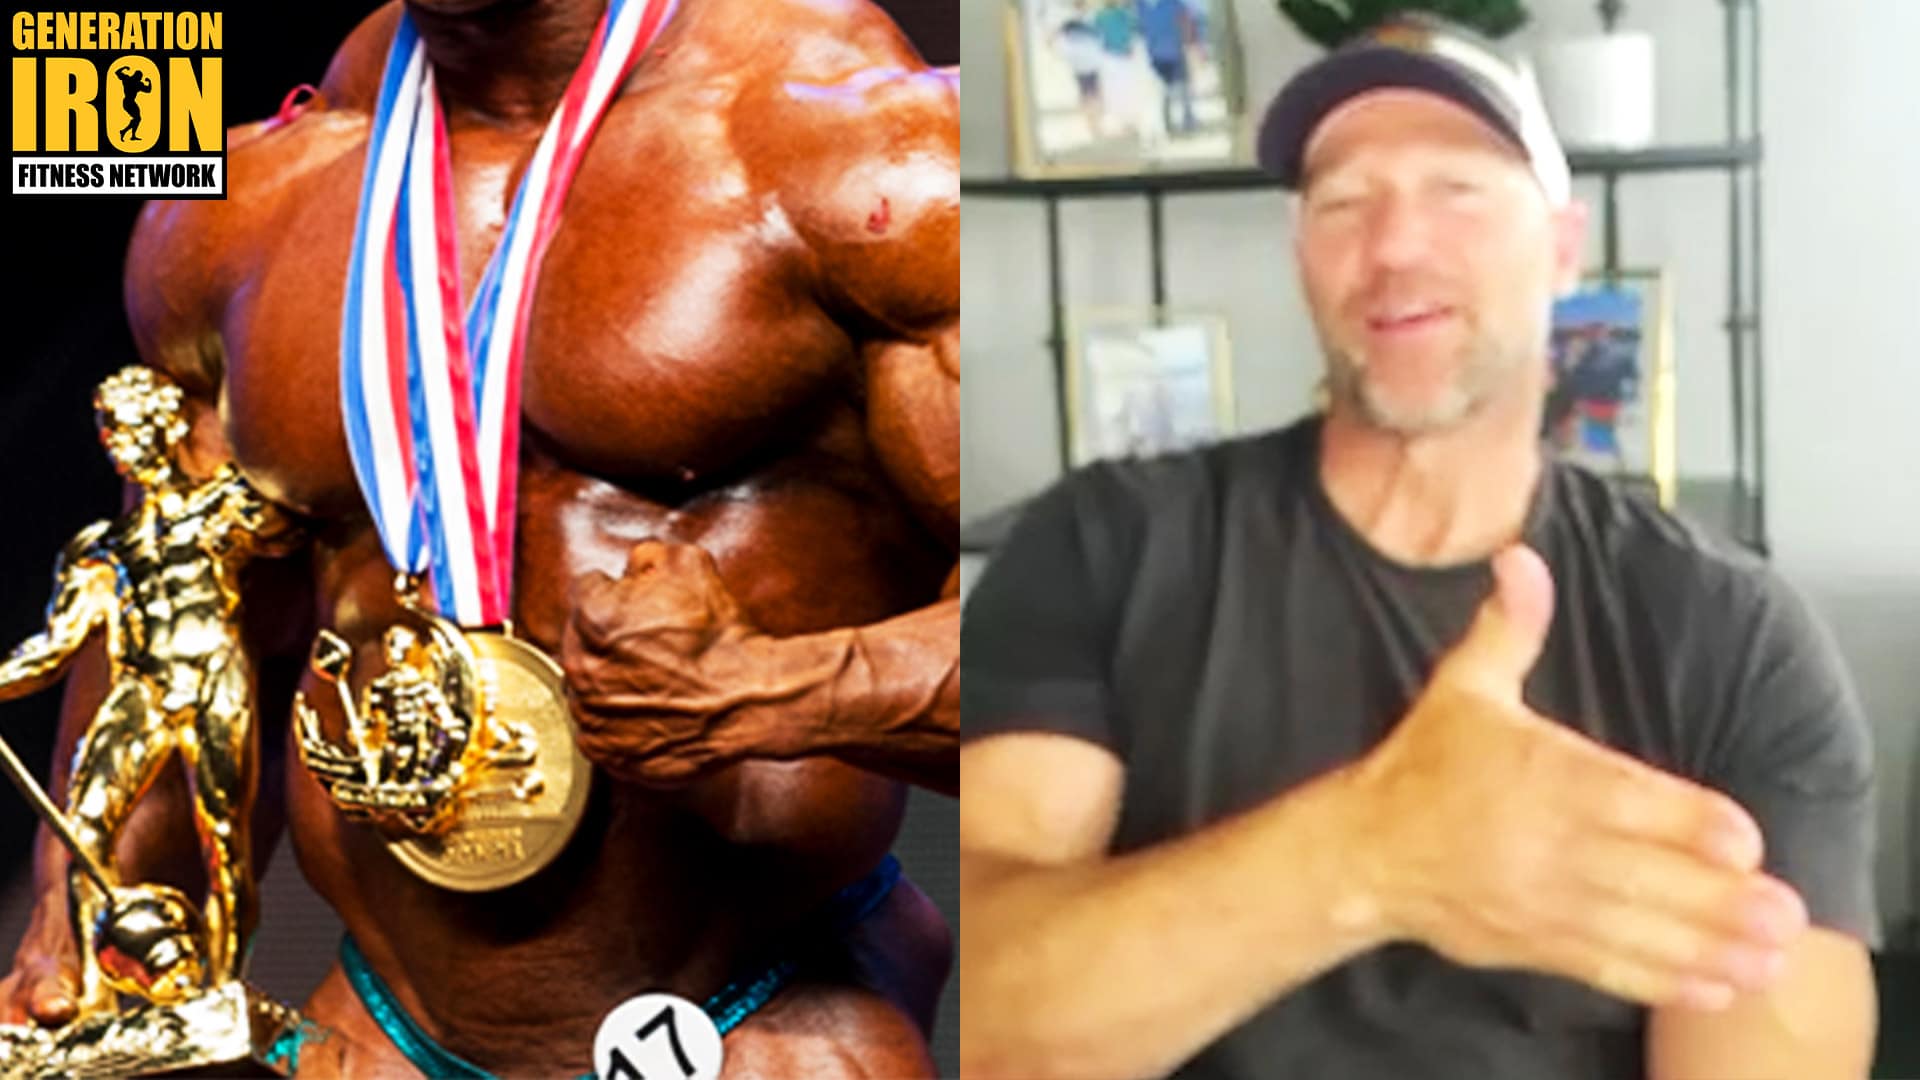 Gunter Schlierkamp: Why Does The Olympia Champion Only Compete At Mr. Olympia?